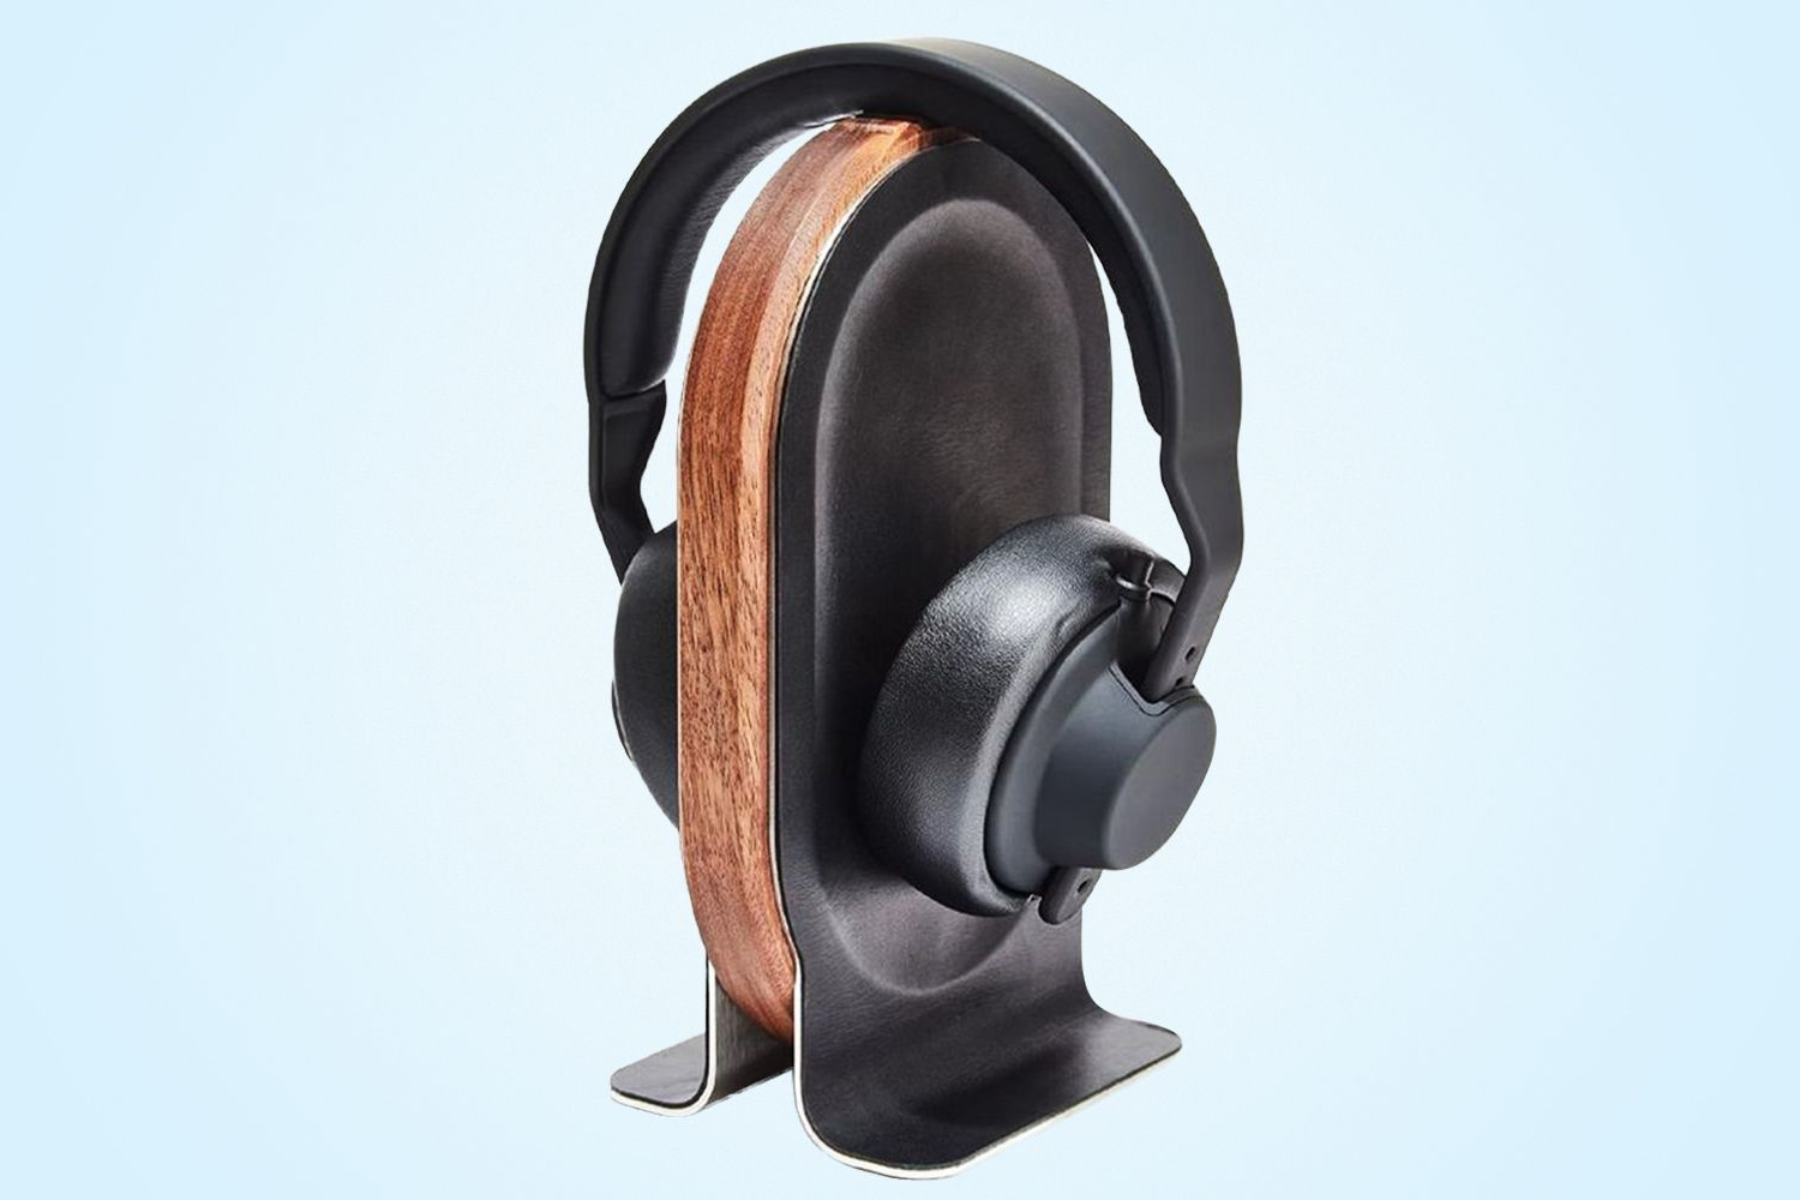 An image of a headphone stand with a headphone resting on it